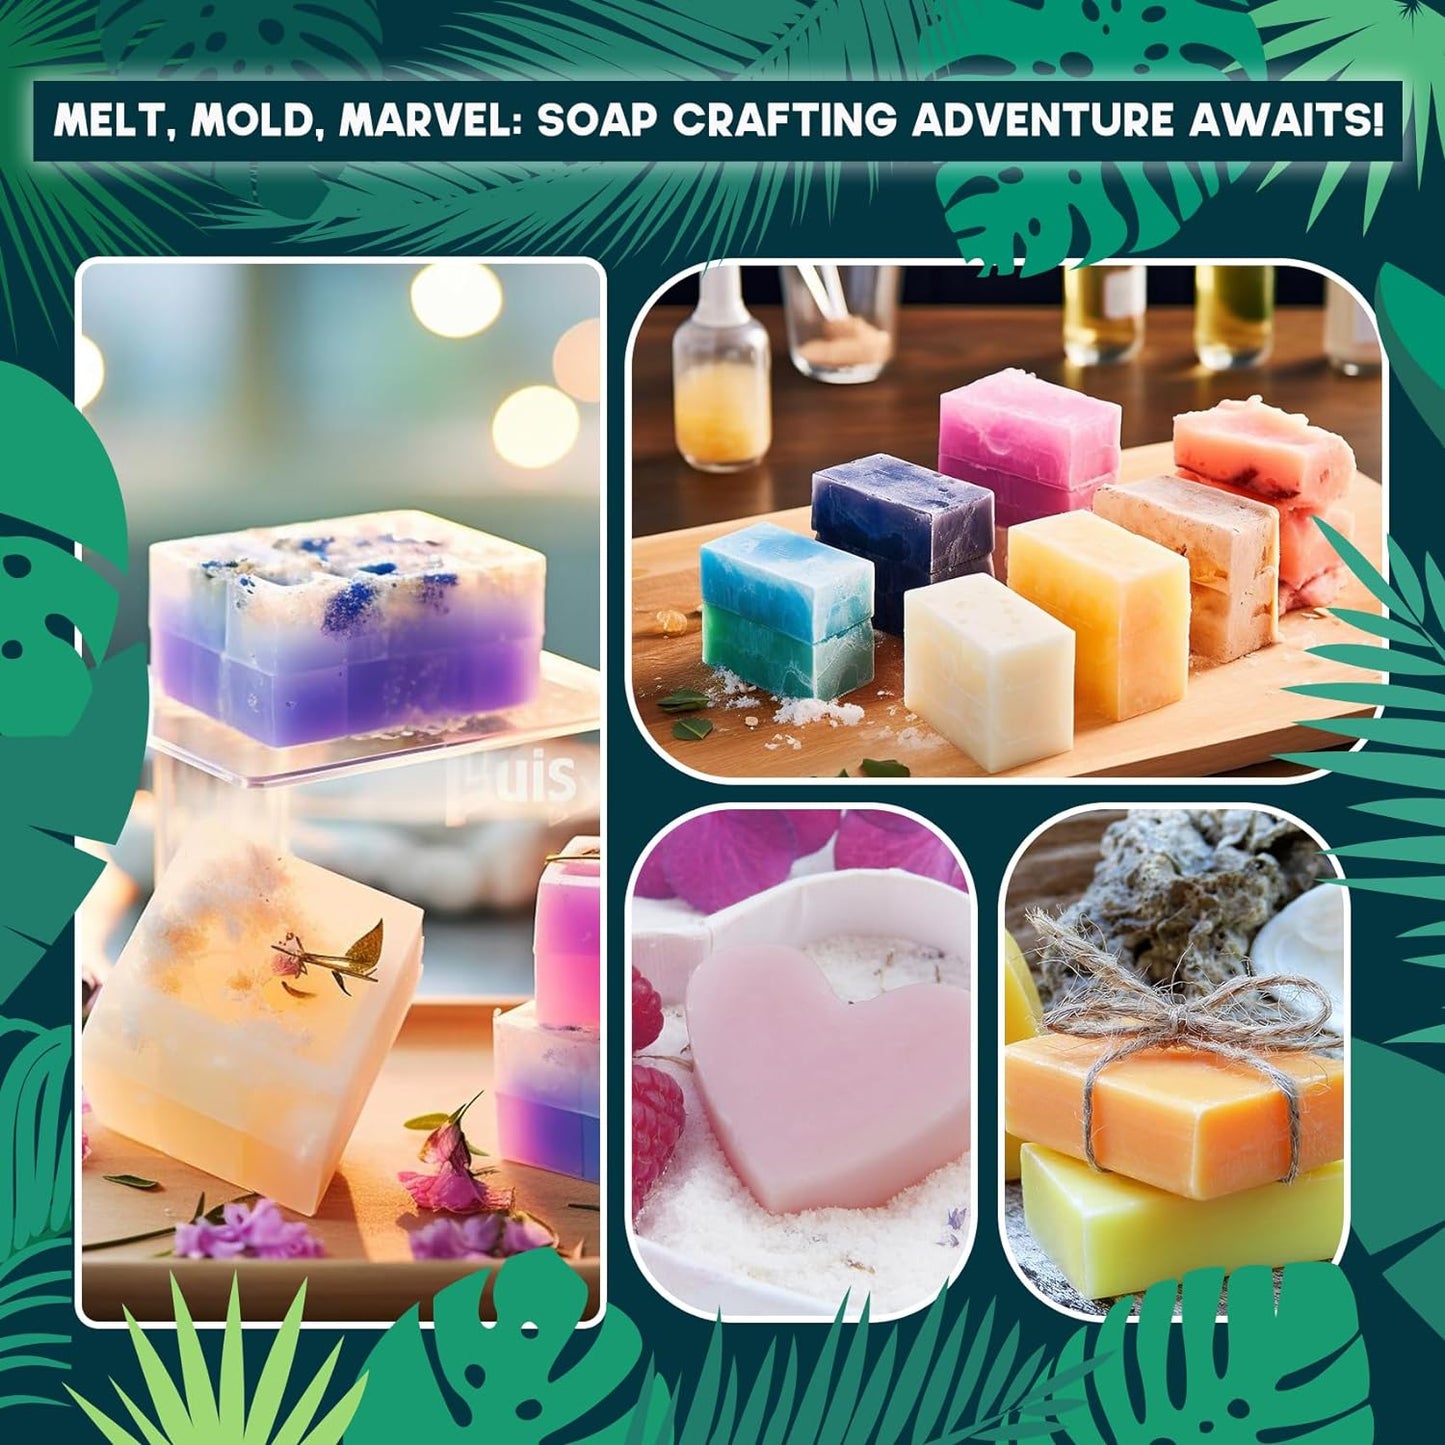 DIY Soap Making Kit Supplies for Beginners – 2Lbs Melt and Pour Soap Base, Flowers, Molds, Essential Oils, Pigments, 10 Gift Boxes & Bags Included!